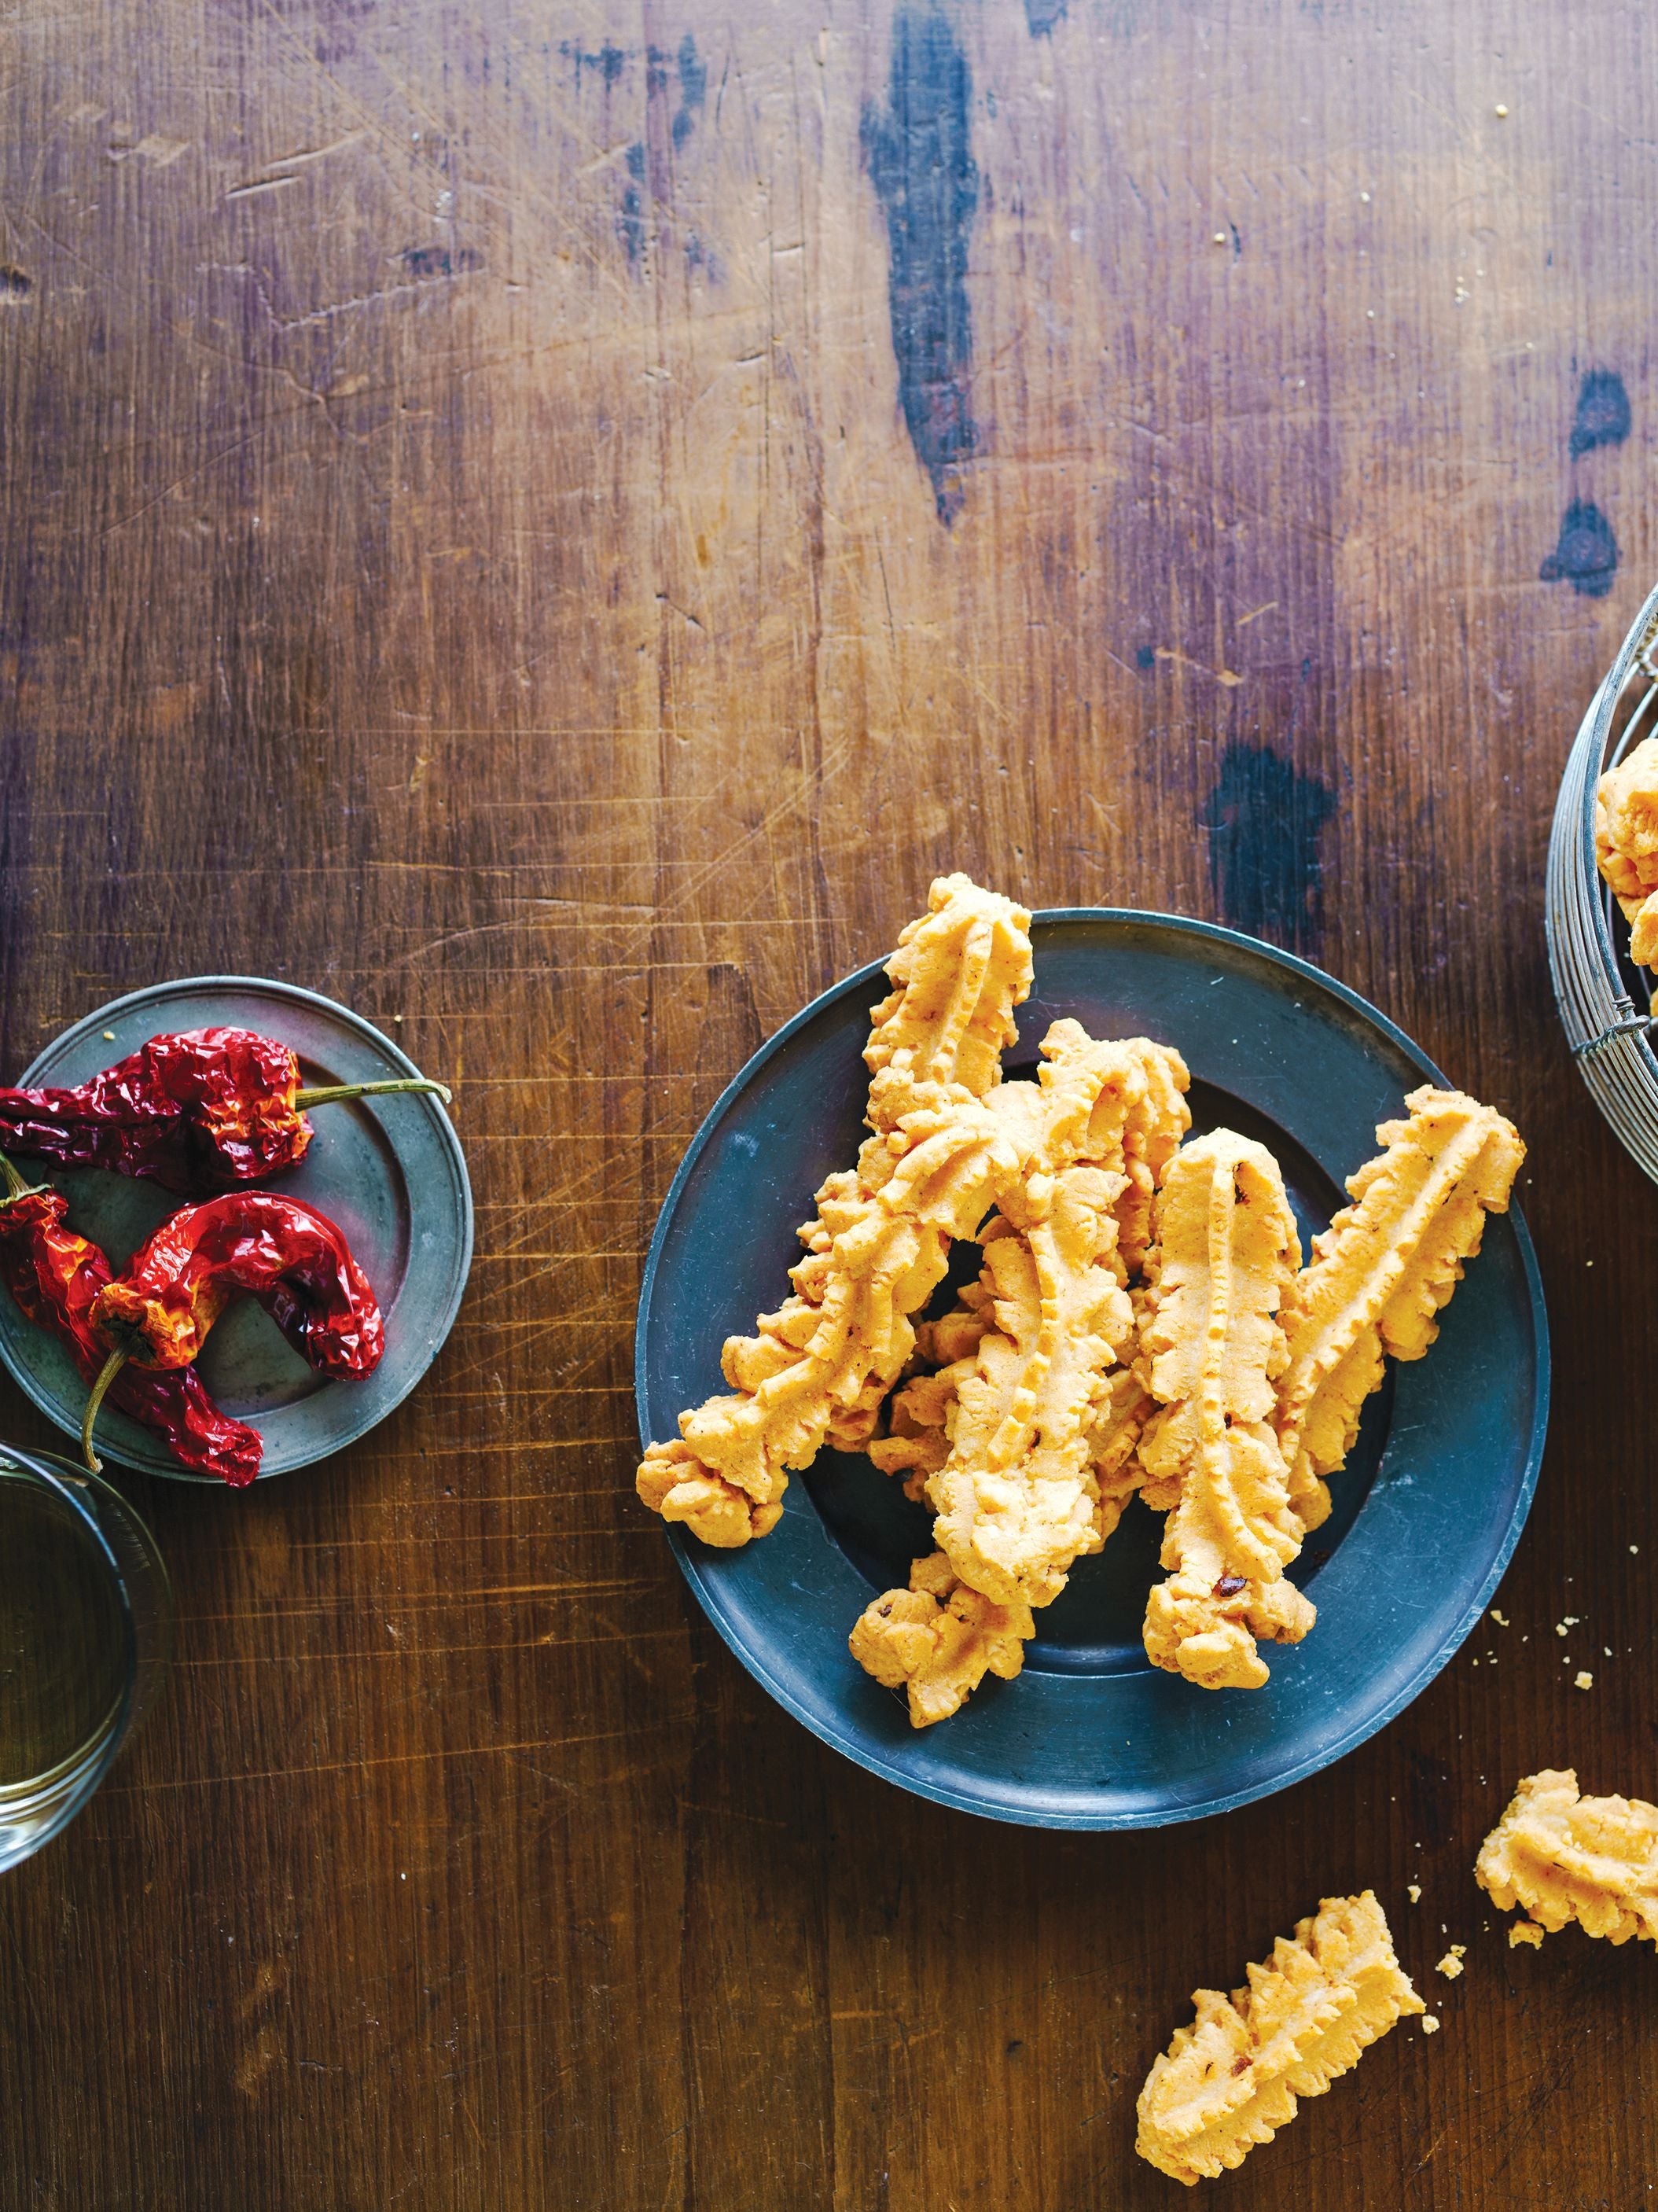 Plate of cheese straws, an ideal Easter gift